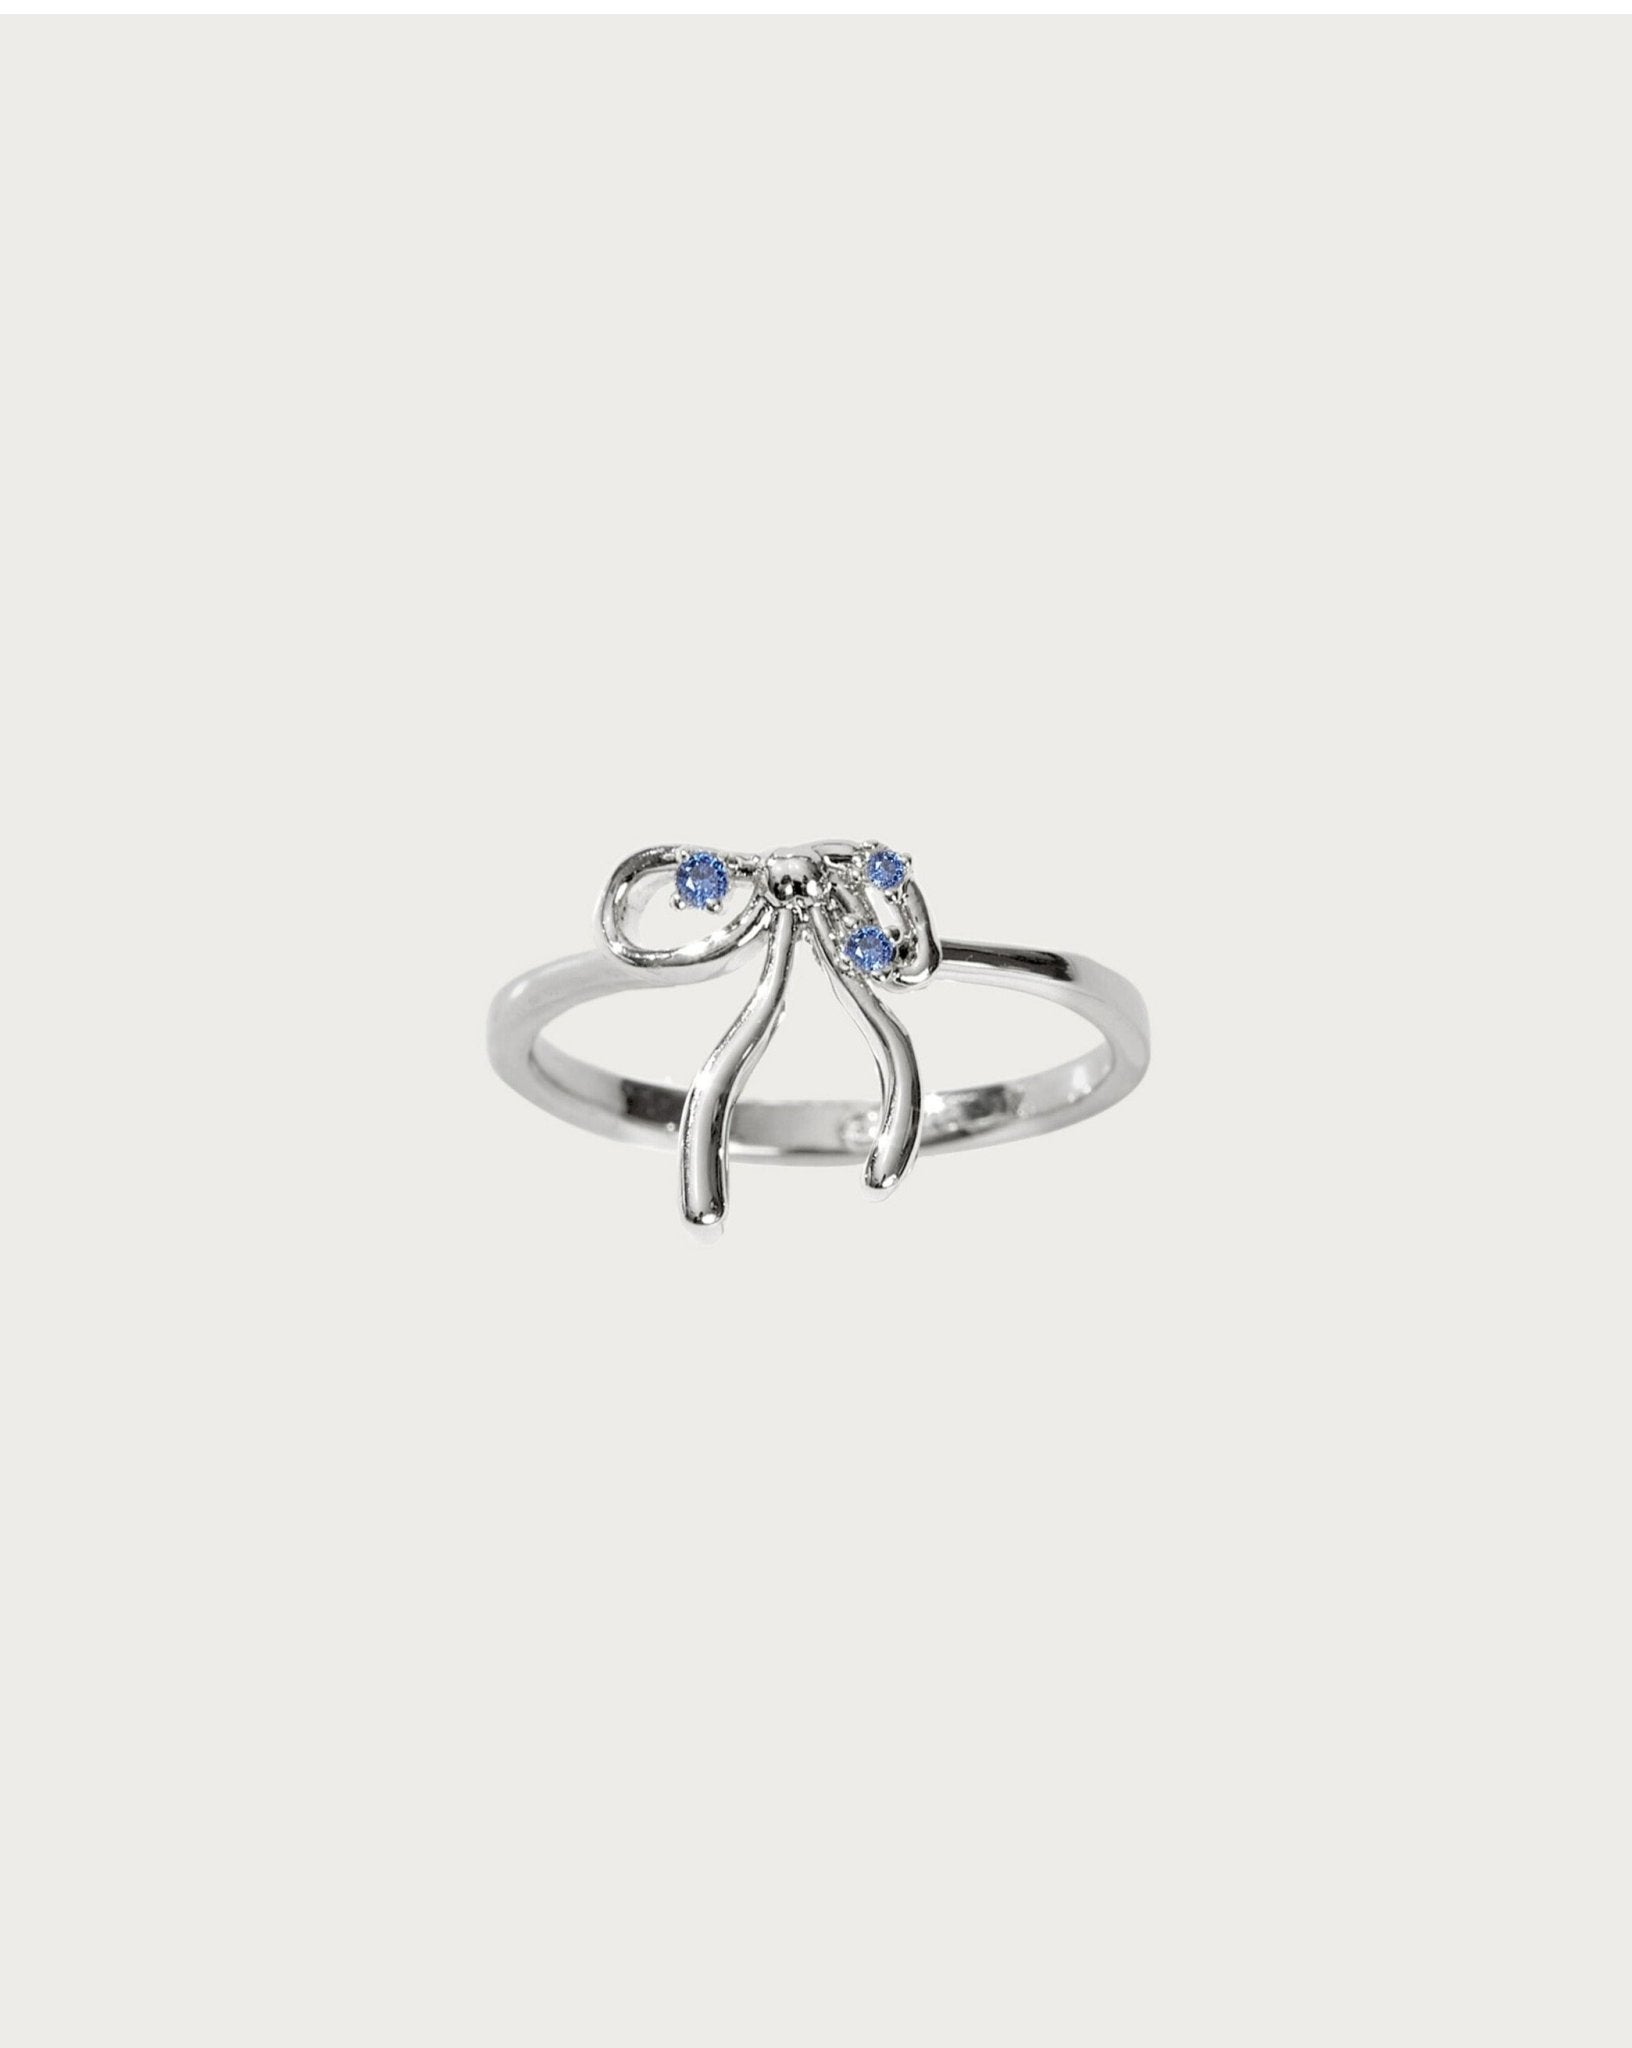 The Miffy Ring in Silver